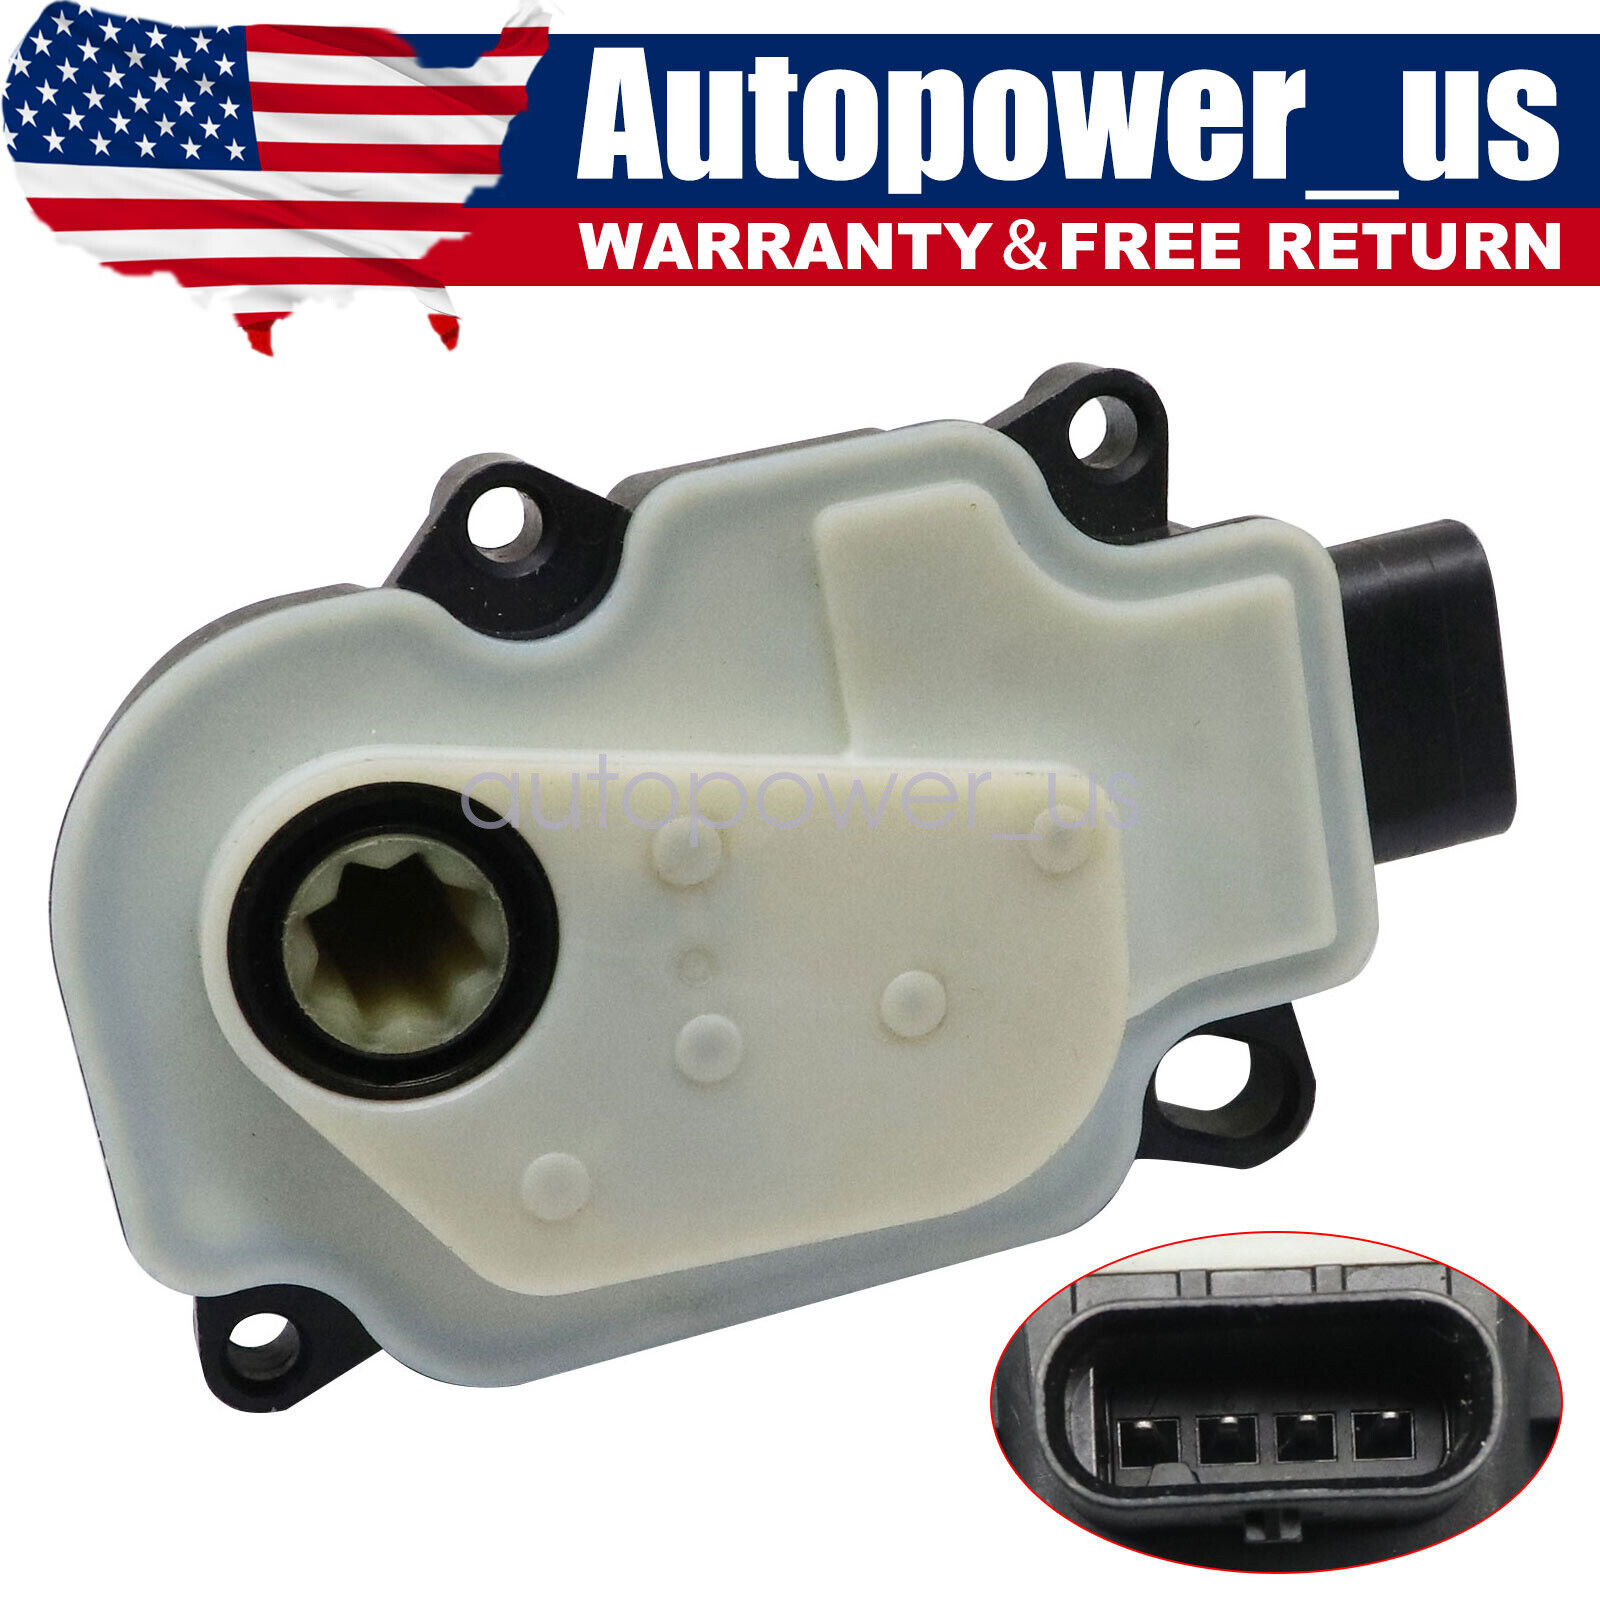 Fits For 2015 2016-2022 Volkswagen VW Jetta Shutter Grille Air Actuator Motor US